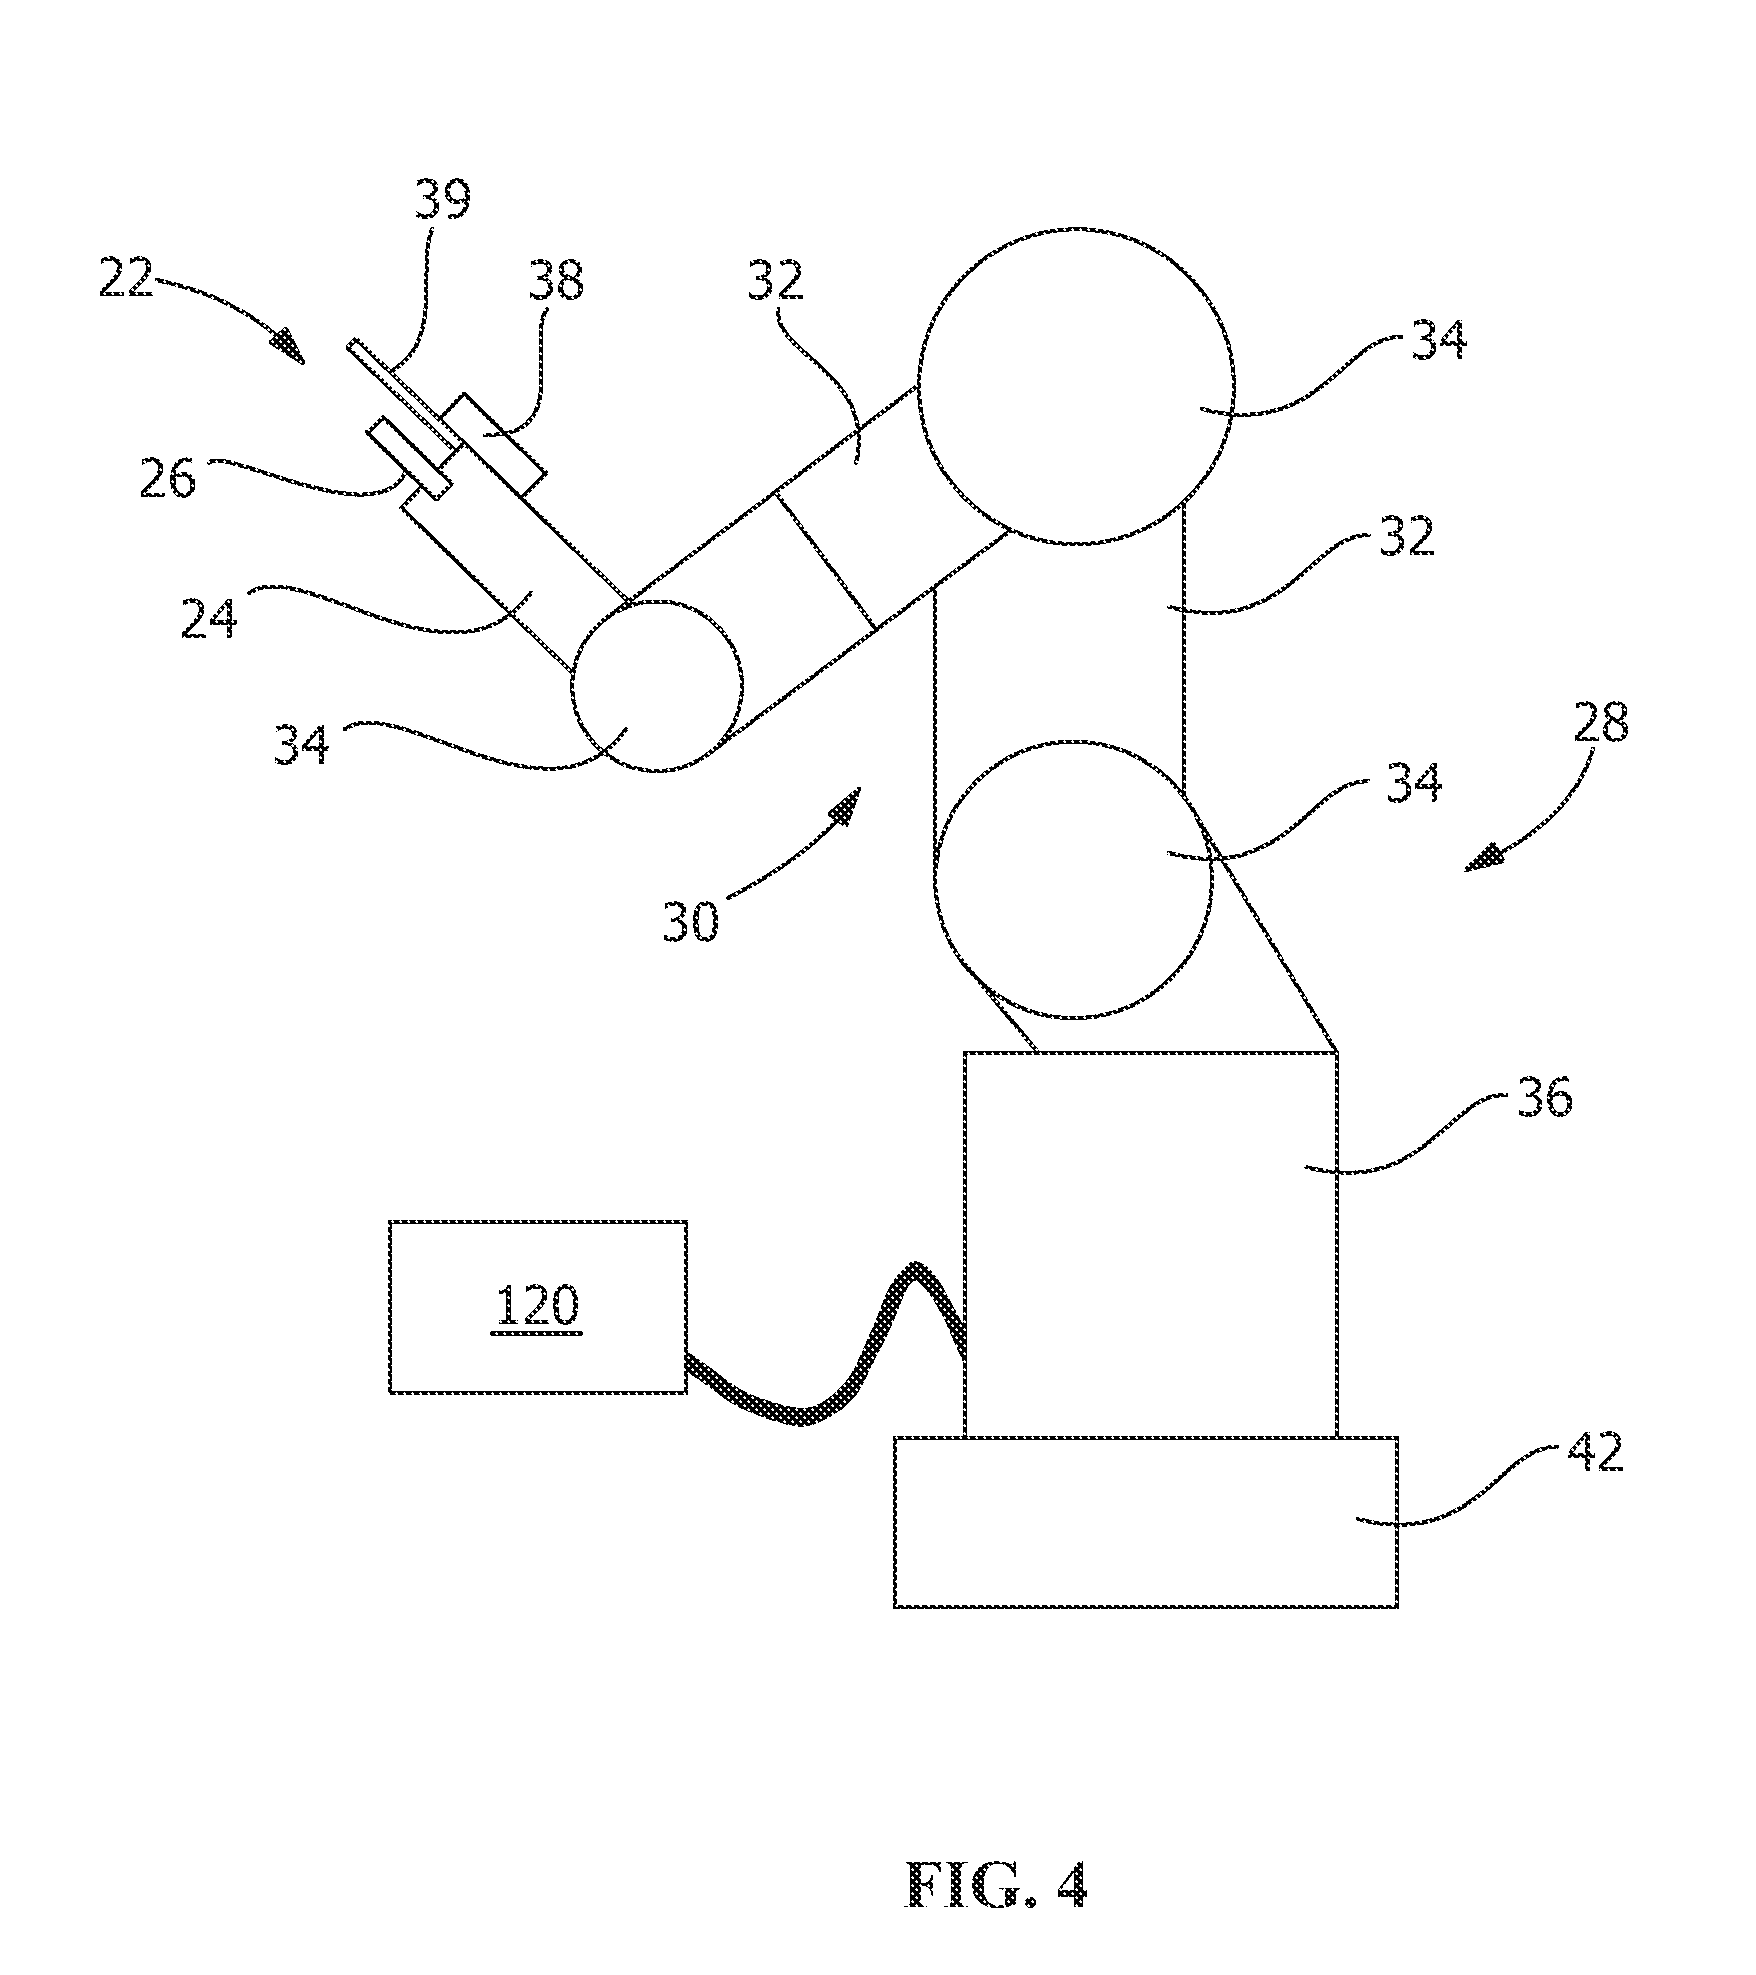 Robotic machining apparatus method and system for turbine buckets